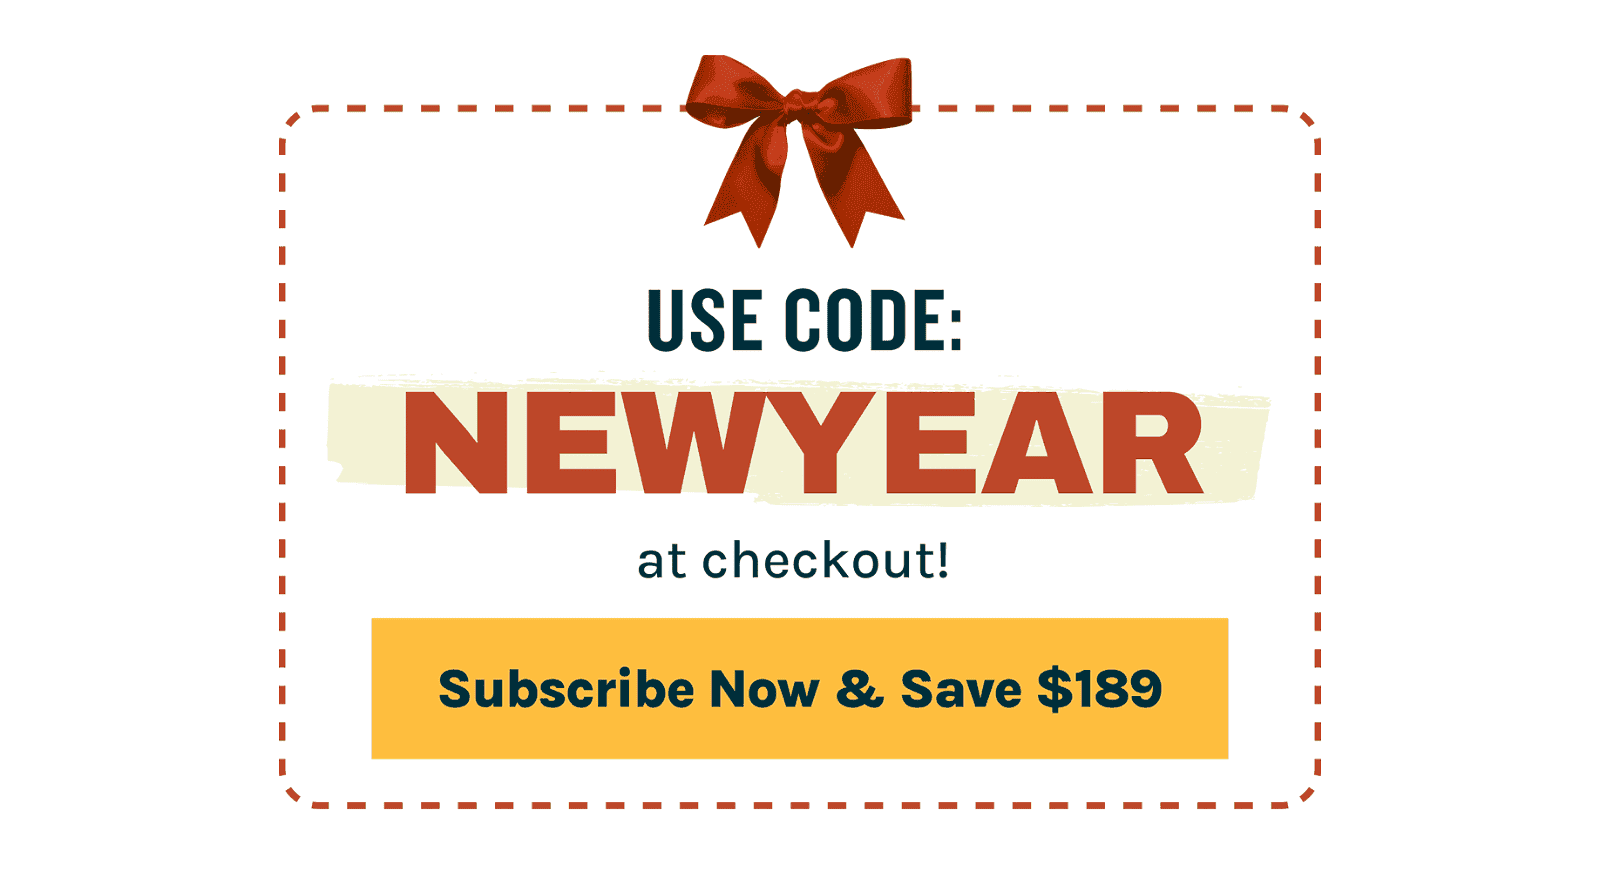 Get FREE Good Ranchers chicken breasts for a year when you use code NEWYEAR at checkout!